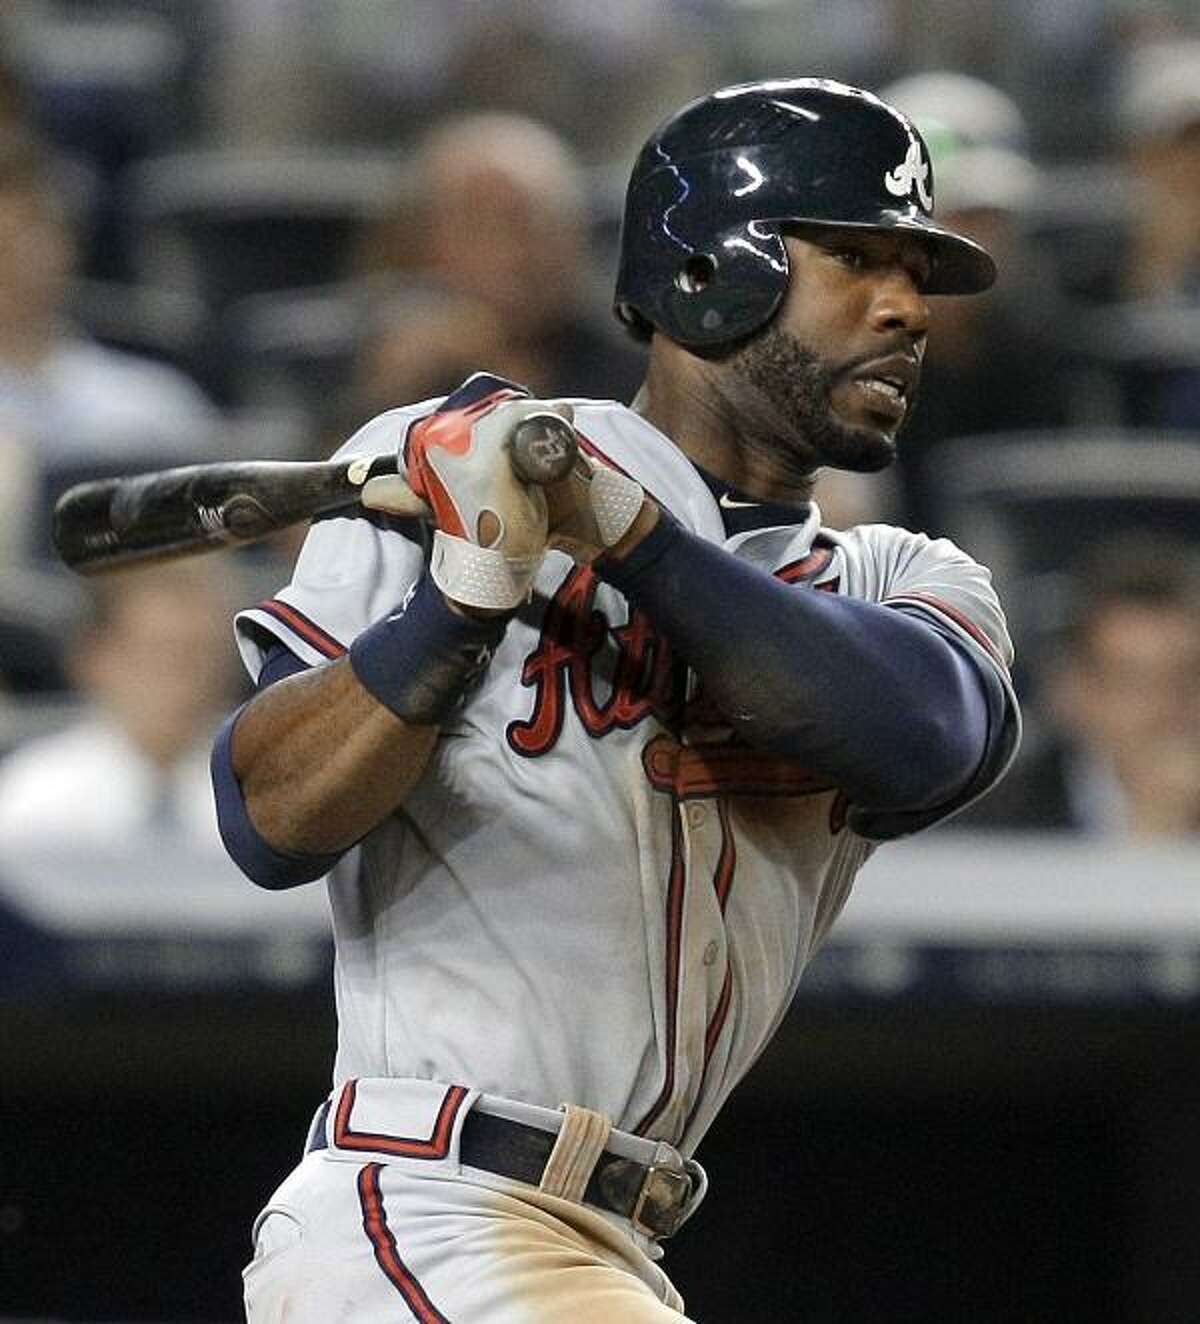 Atlanta Braves' Jason Heyward watches his infield single during the sixth inning of the Braves' baseball game against the New York Yankees at Yankee Stadium in New York , Tuesday, June 19, 2012. The ball hit New York Yankees first baseman Mark Teixeira on the foot. (AP Photo/Kathy Willens)